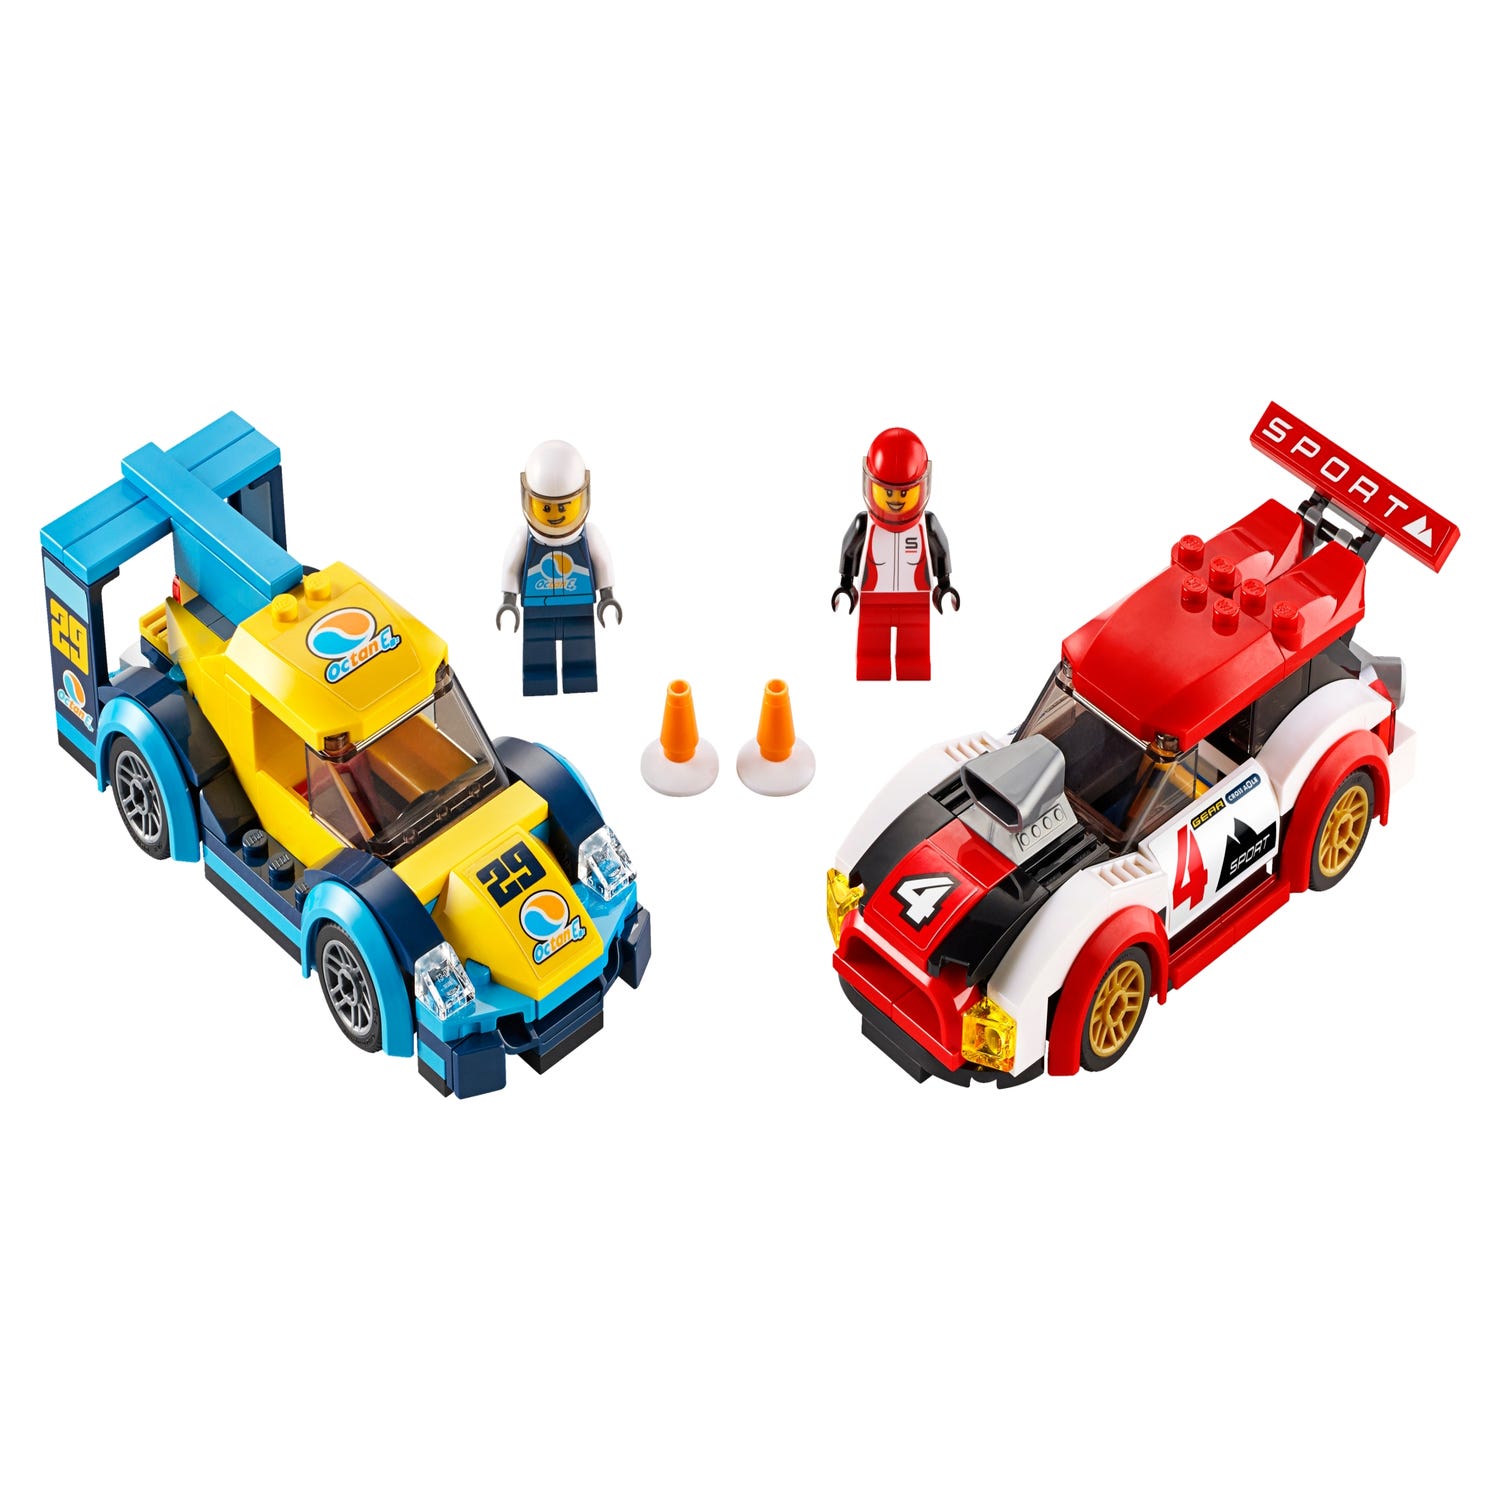 Drivers lego system a/s review